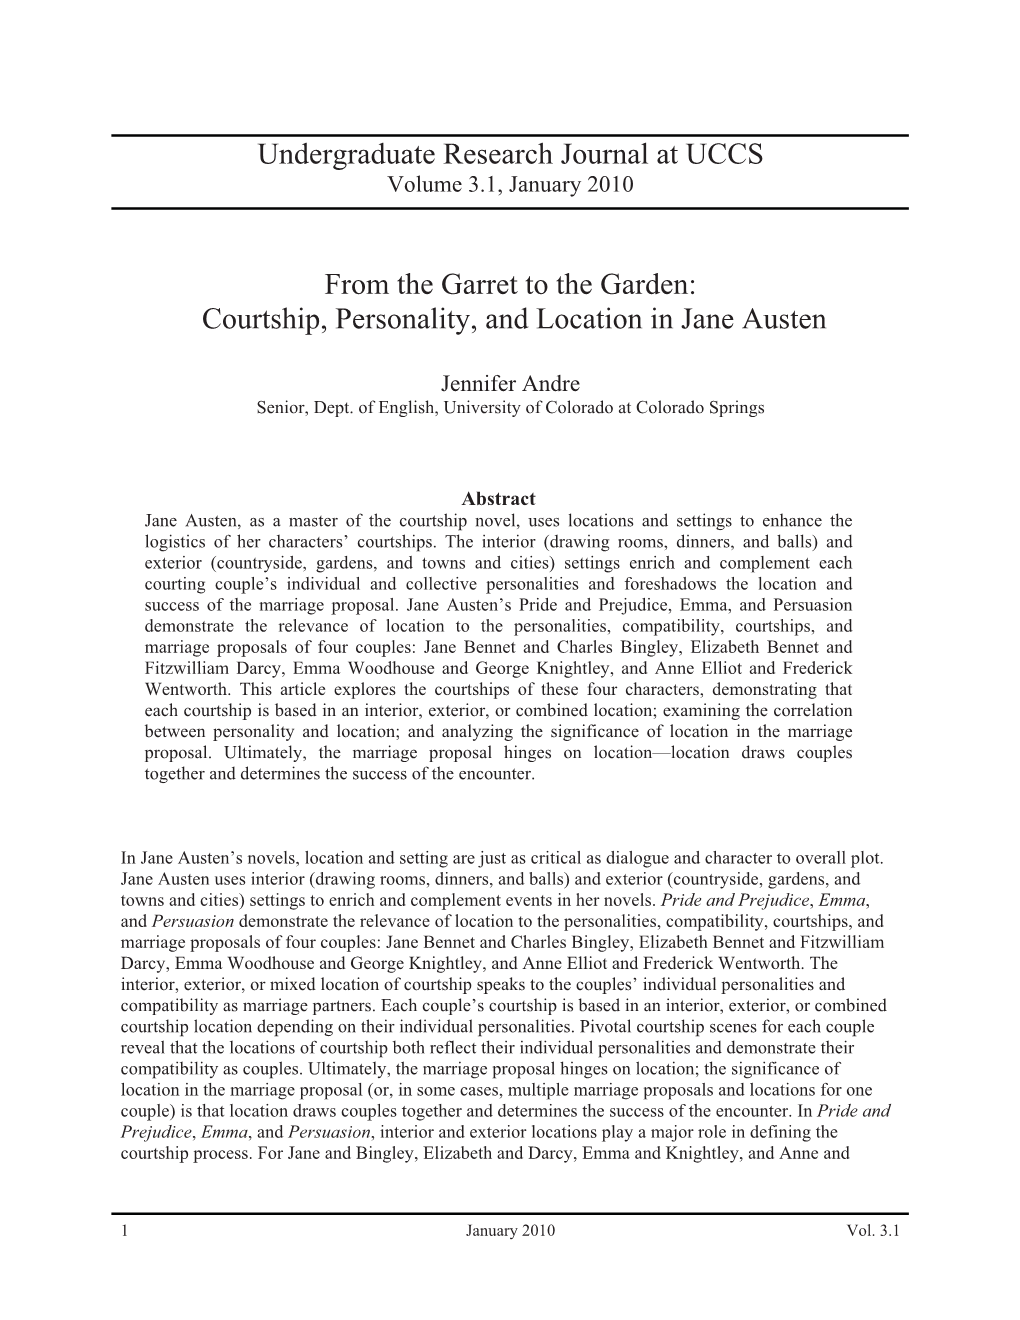 Courtship, Personality, and Location in Jane Austen